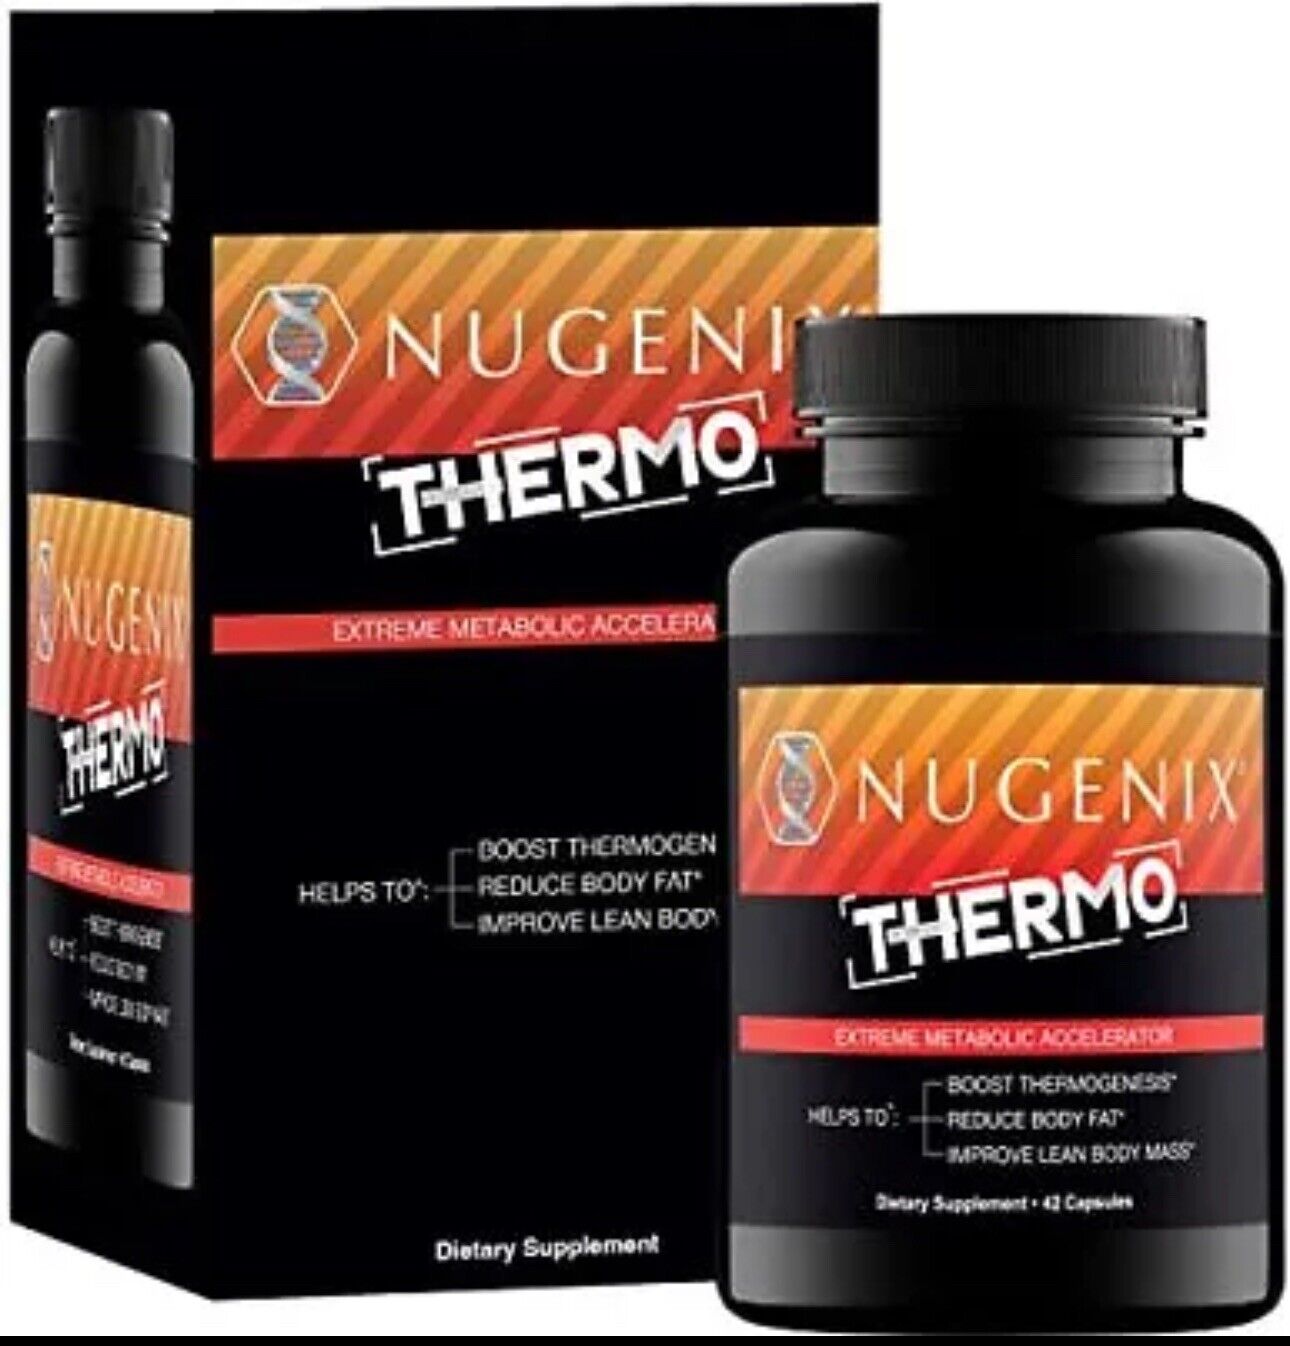 Nugenix Thermo Extreme Metabolic Accelerator Capsules Supplement - 60 Count